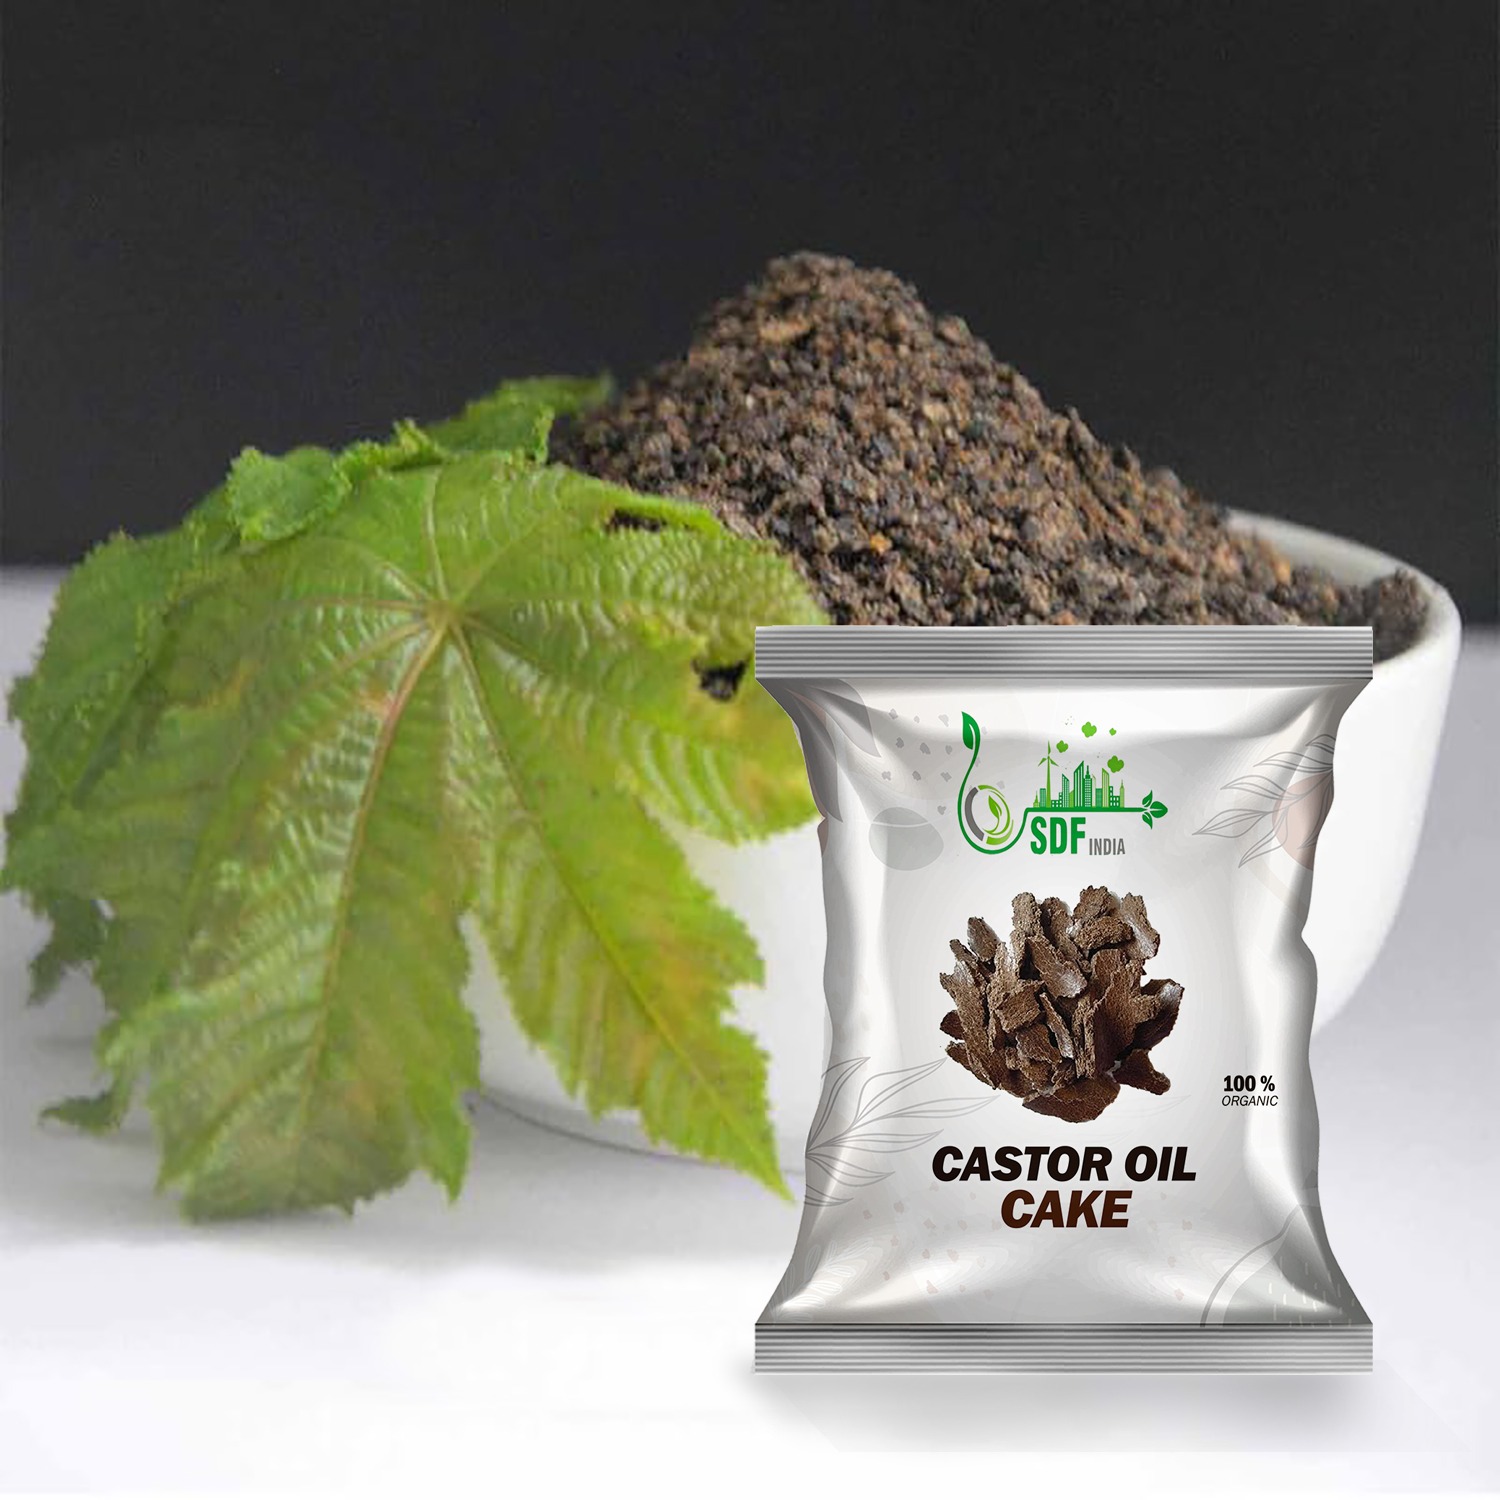 6092 SDF India Castor Oil Seed Cake Powder | 100% Natural, Organic NPK Fertilizers | Micronutrients for Plants | Home & Terrace Gardening | Boosts Plant Growth & Pest Repellent (5Kg) (SDFindia5kgCC)(6092_Castor cake_5kg)